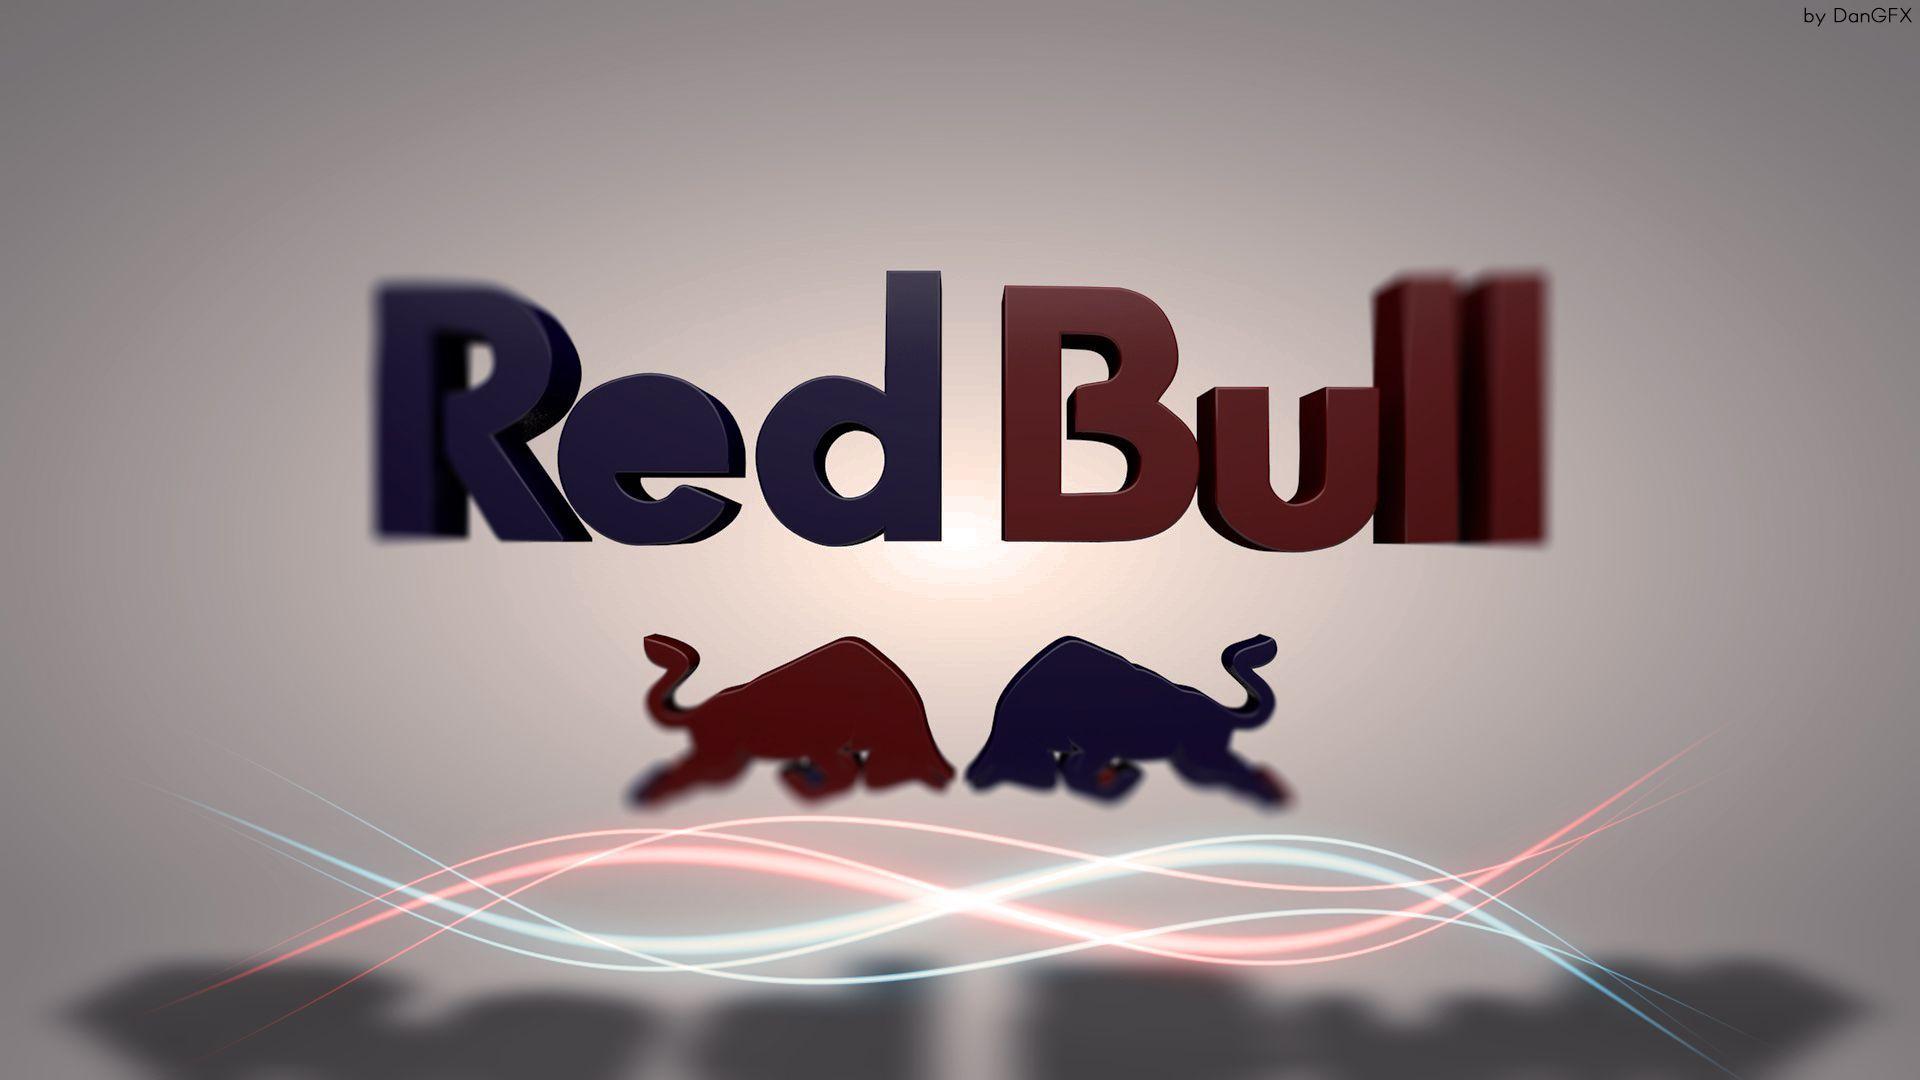 Red Bull Backgrounds Wallpapers